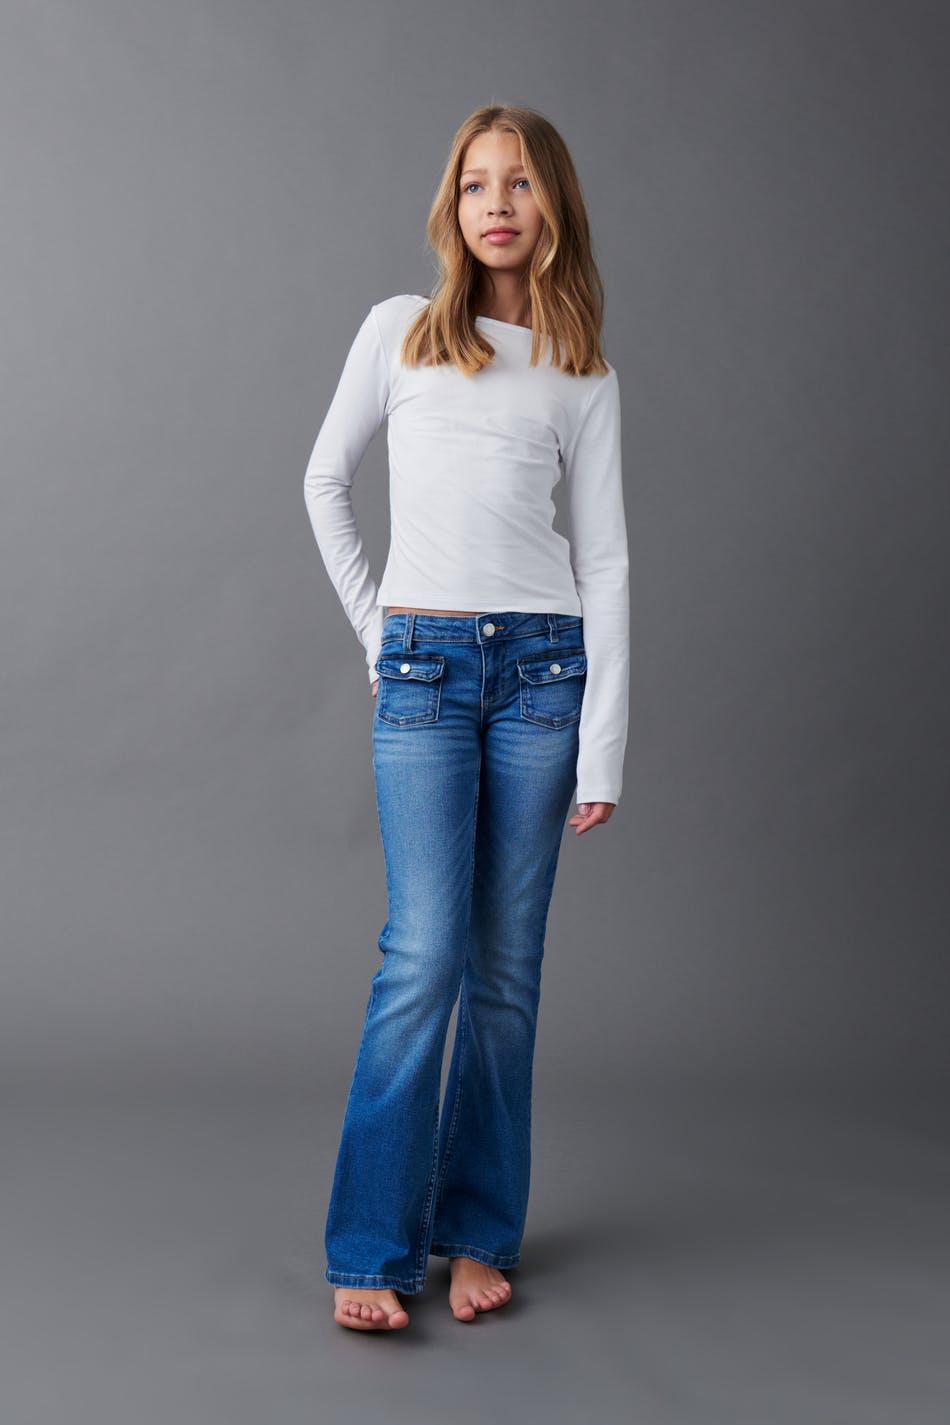 Gina Tricot - Front pocket bootcut jeans - wide jeans - Blue - 164 - Female